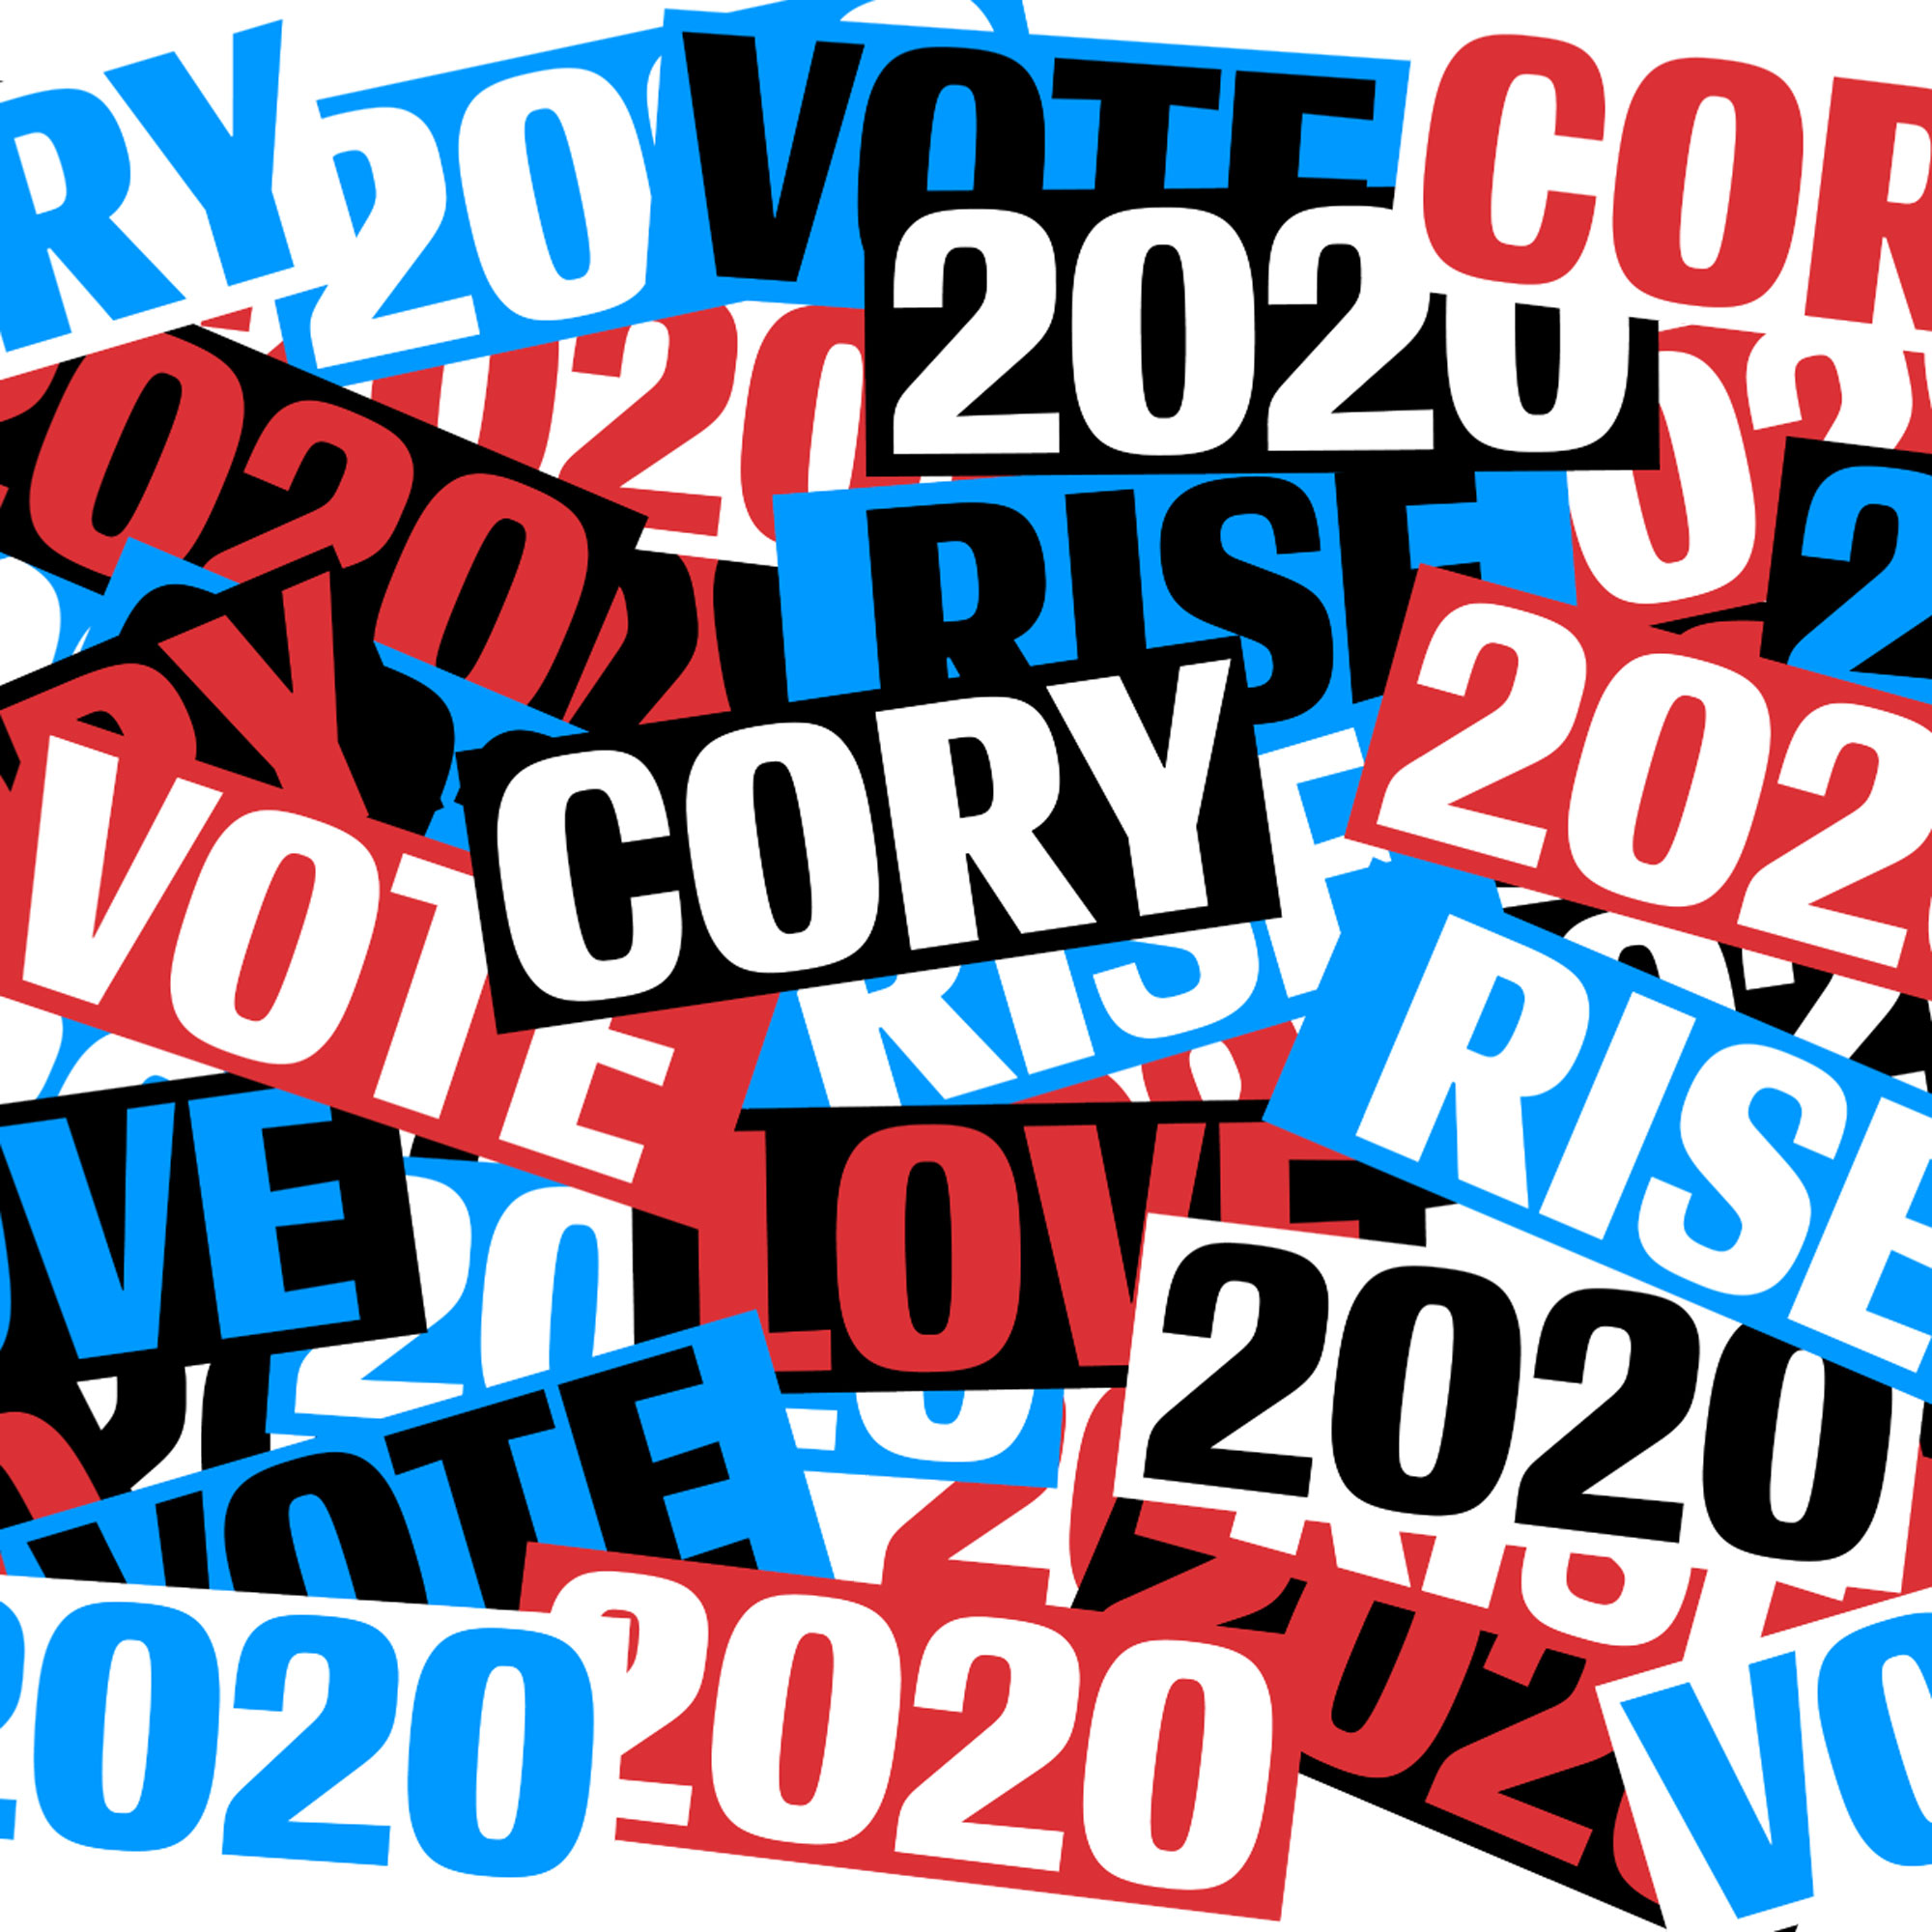 Booker 2020 Cards